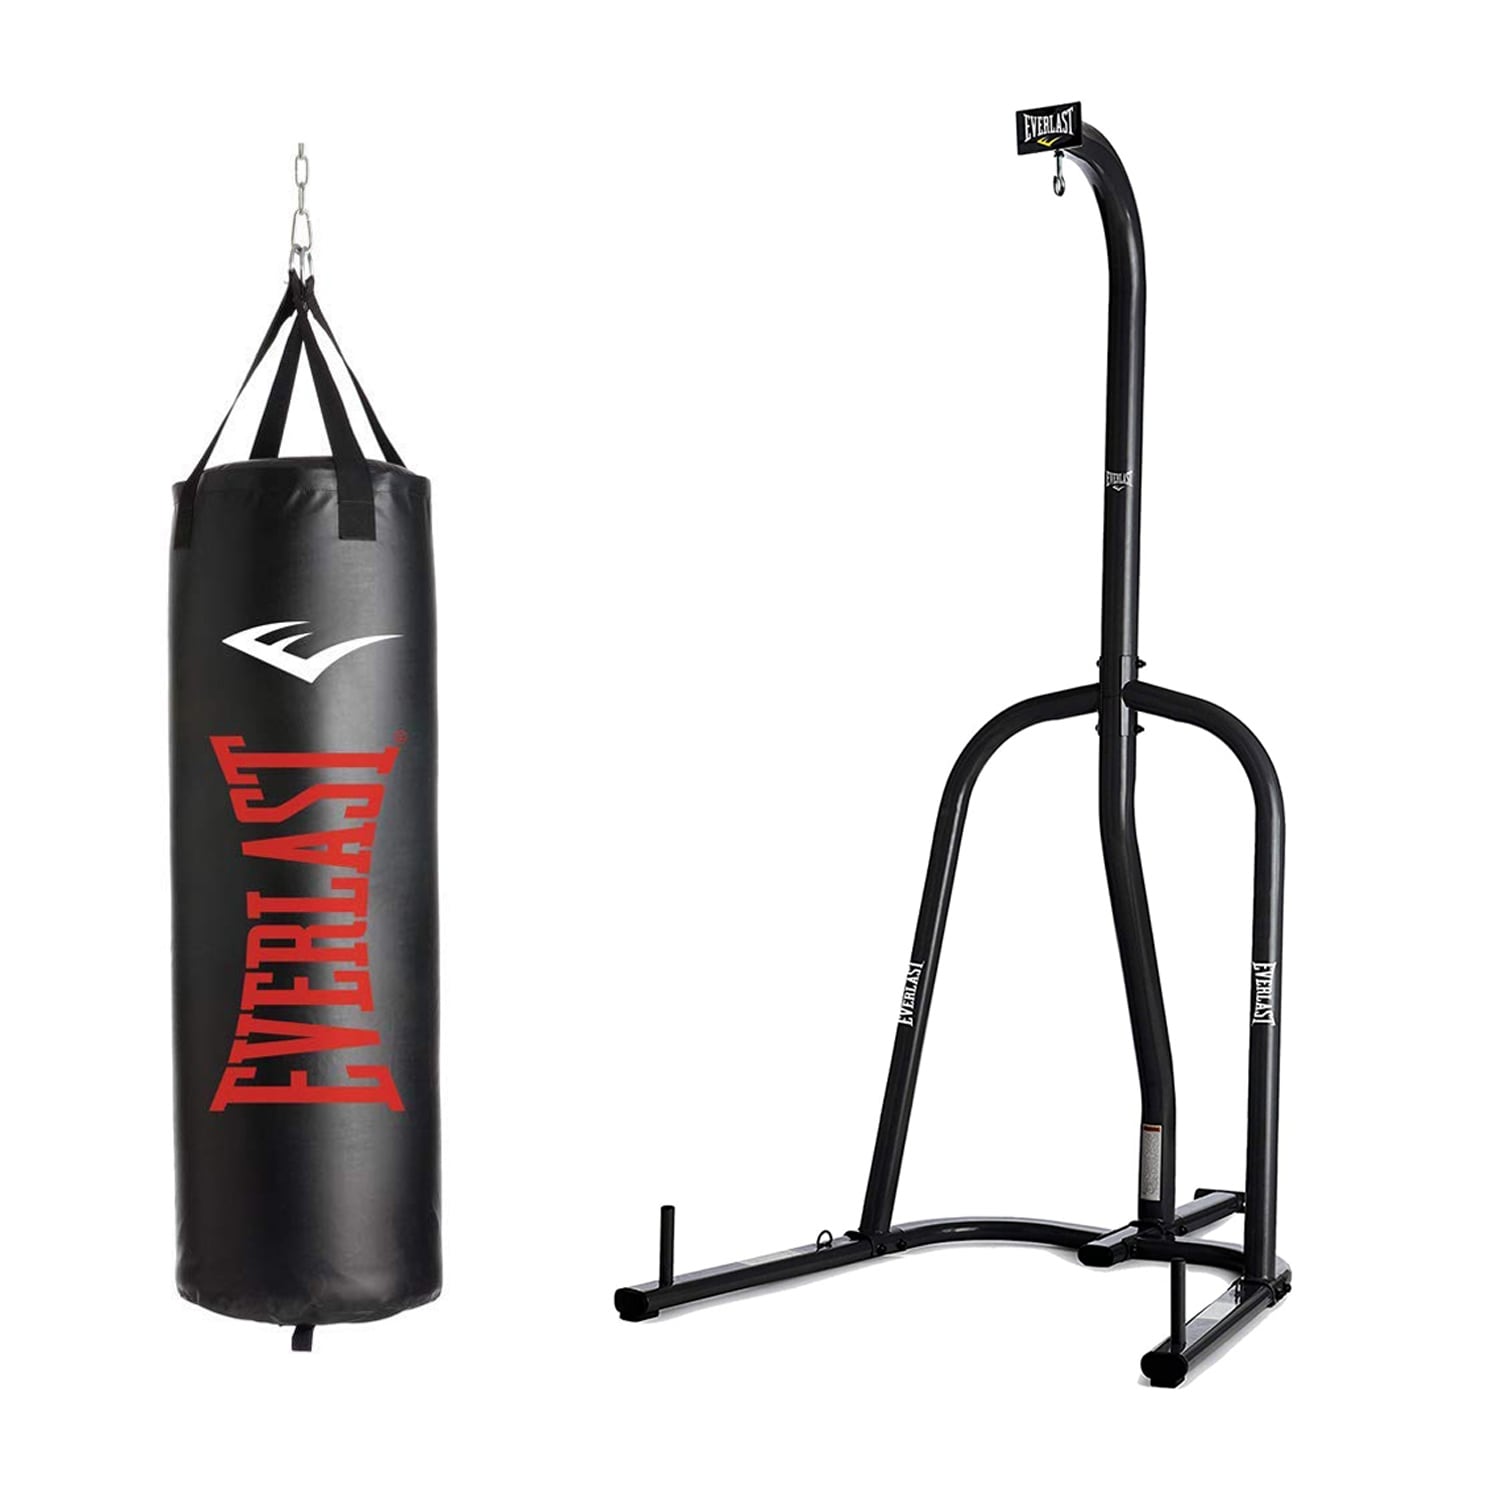 Everlast Fitness Workout 70 Pound Heavy Boxing Punching Bag Gray Brand New MMA 